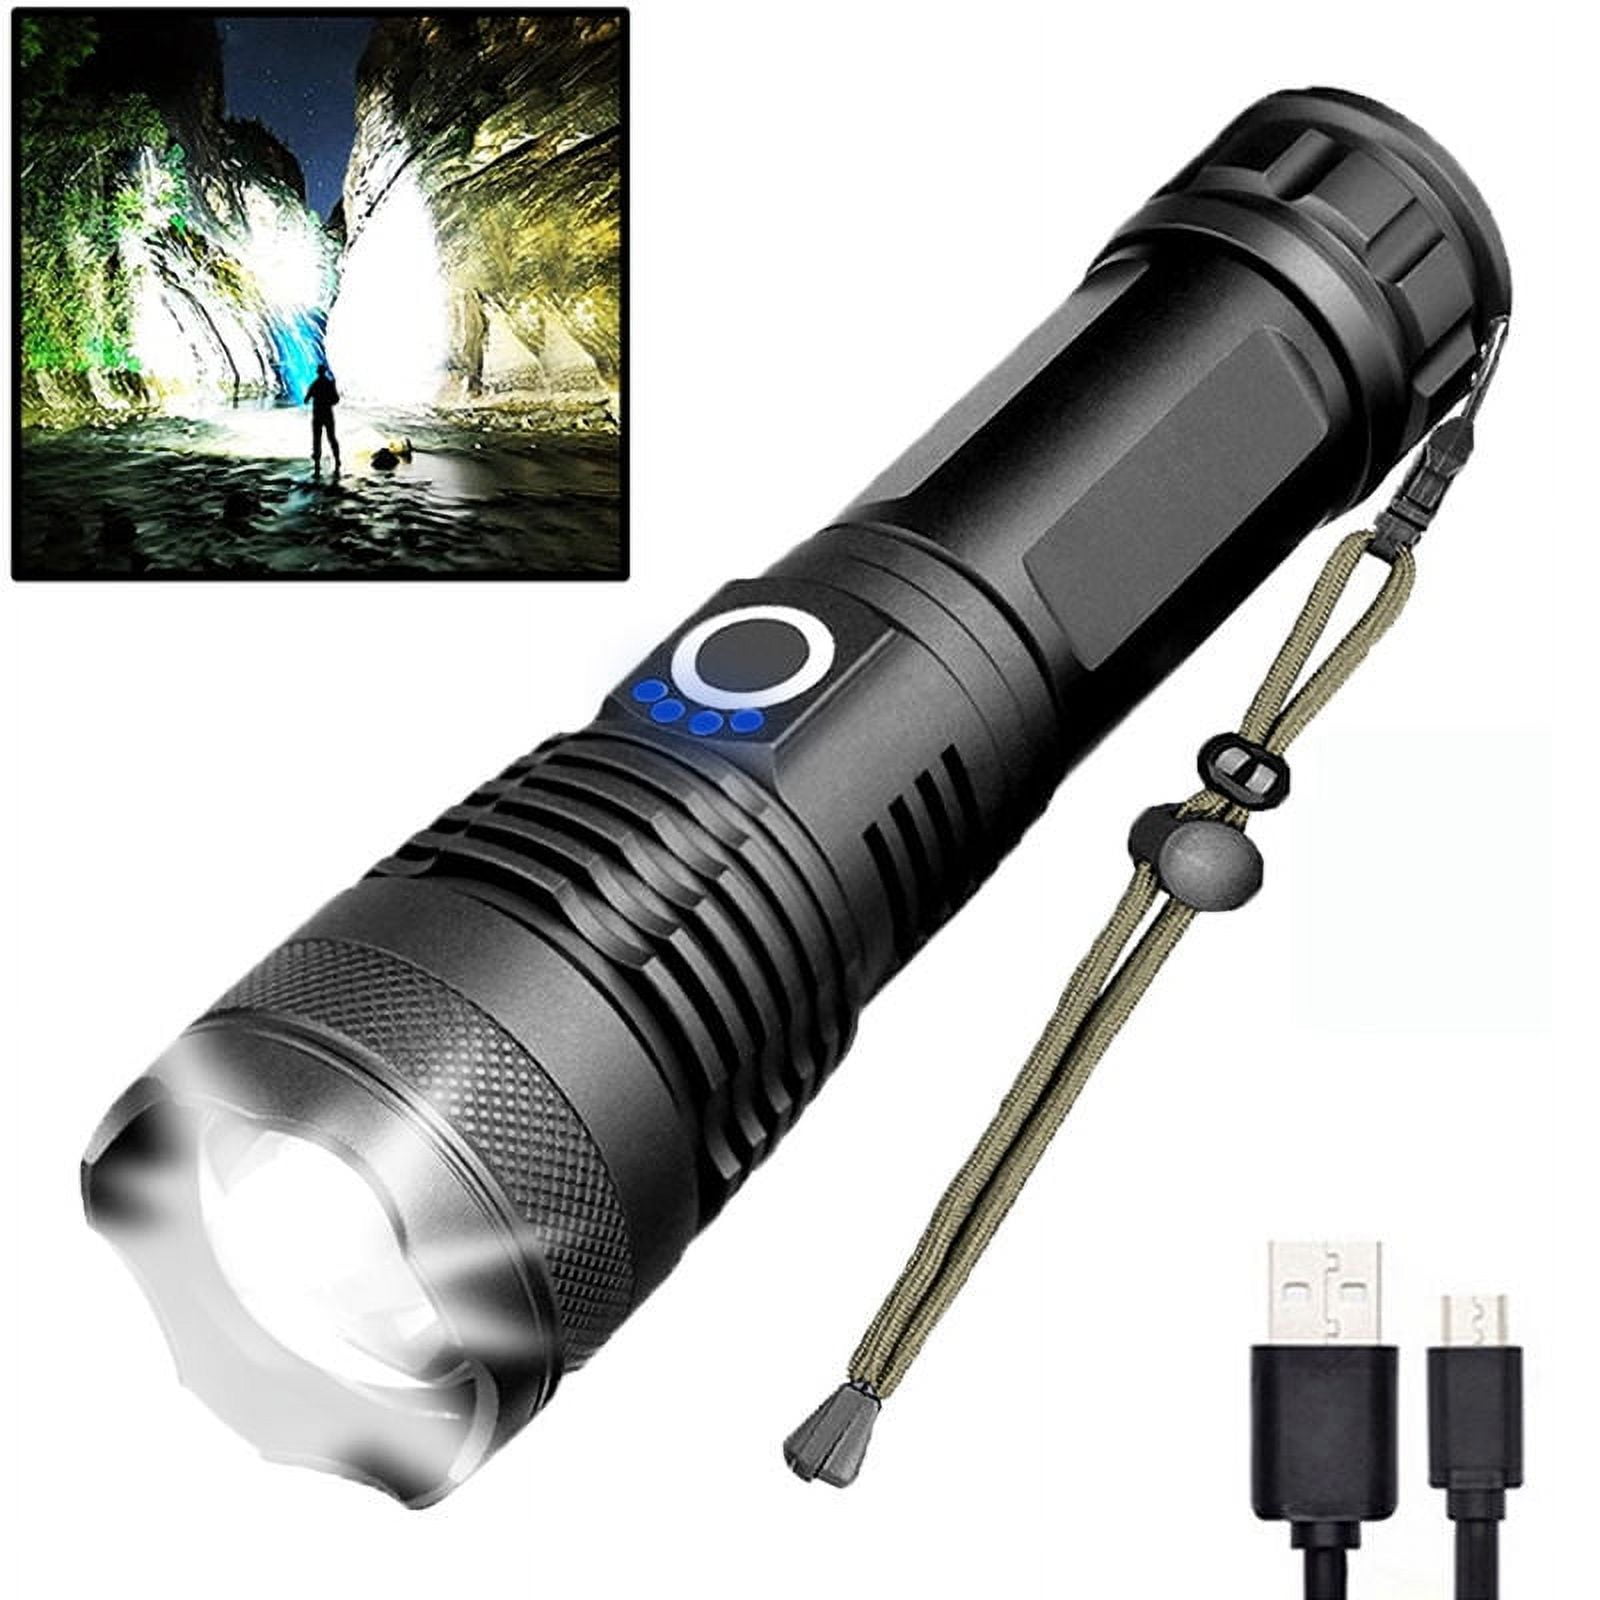 Travelwant Rechargeable Waterproof Solar Powered Rechargeable LED Flashlight Hand Crank Emergency Light Survival Gear Best for Fishing Hiking Backpack